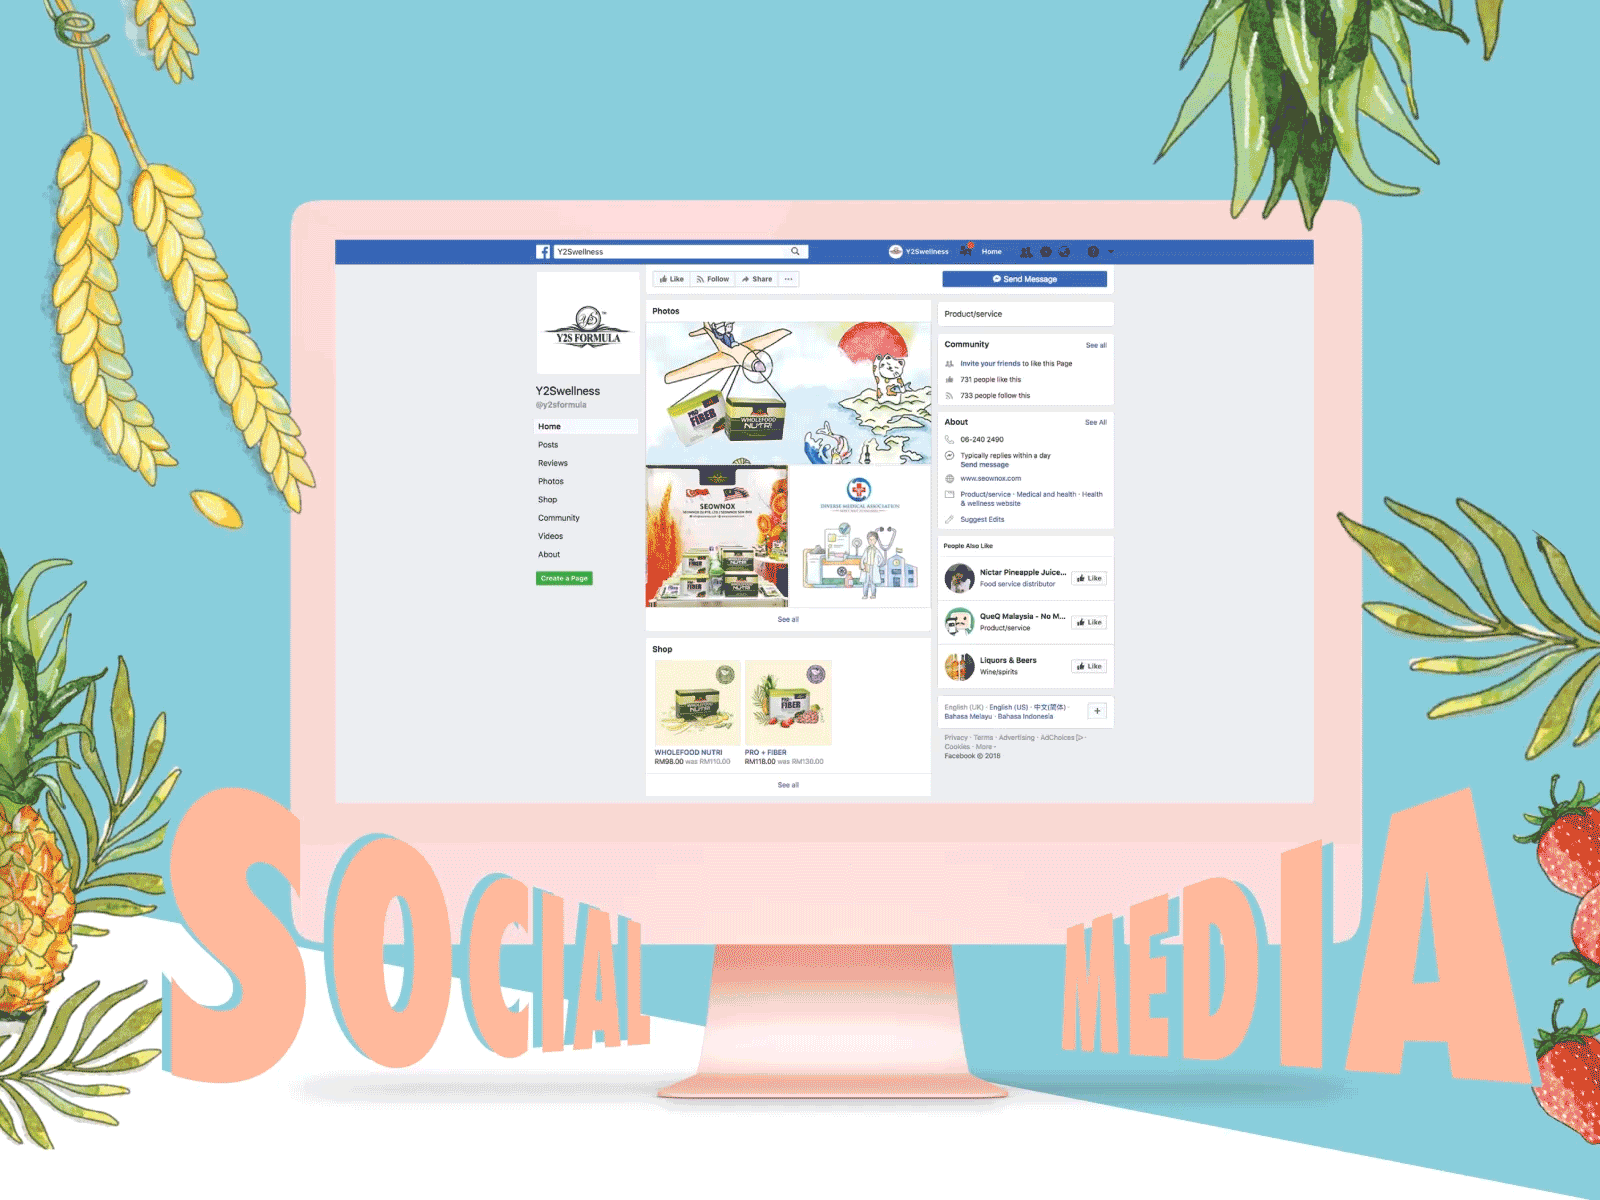 Y2S Wellness social media management post illustration featured on Facebook viewed on a desktop with surrounding illustration of wheat and fruits